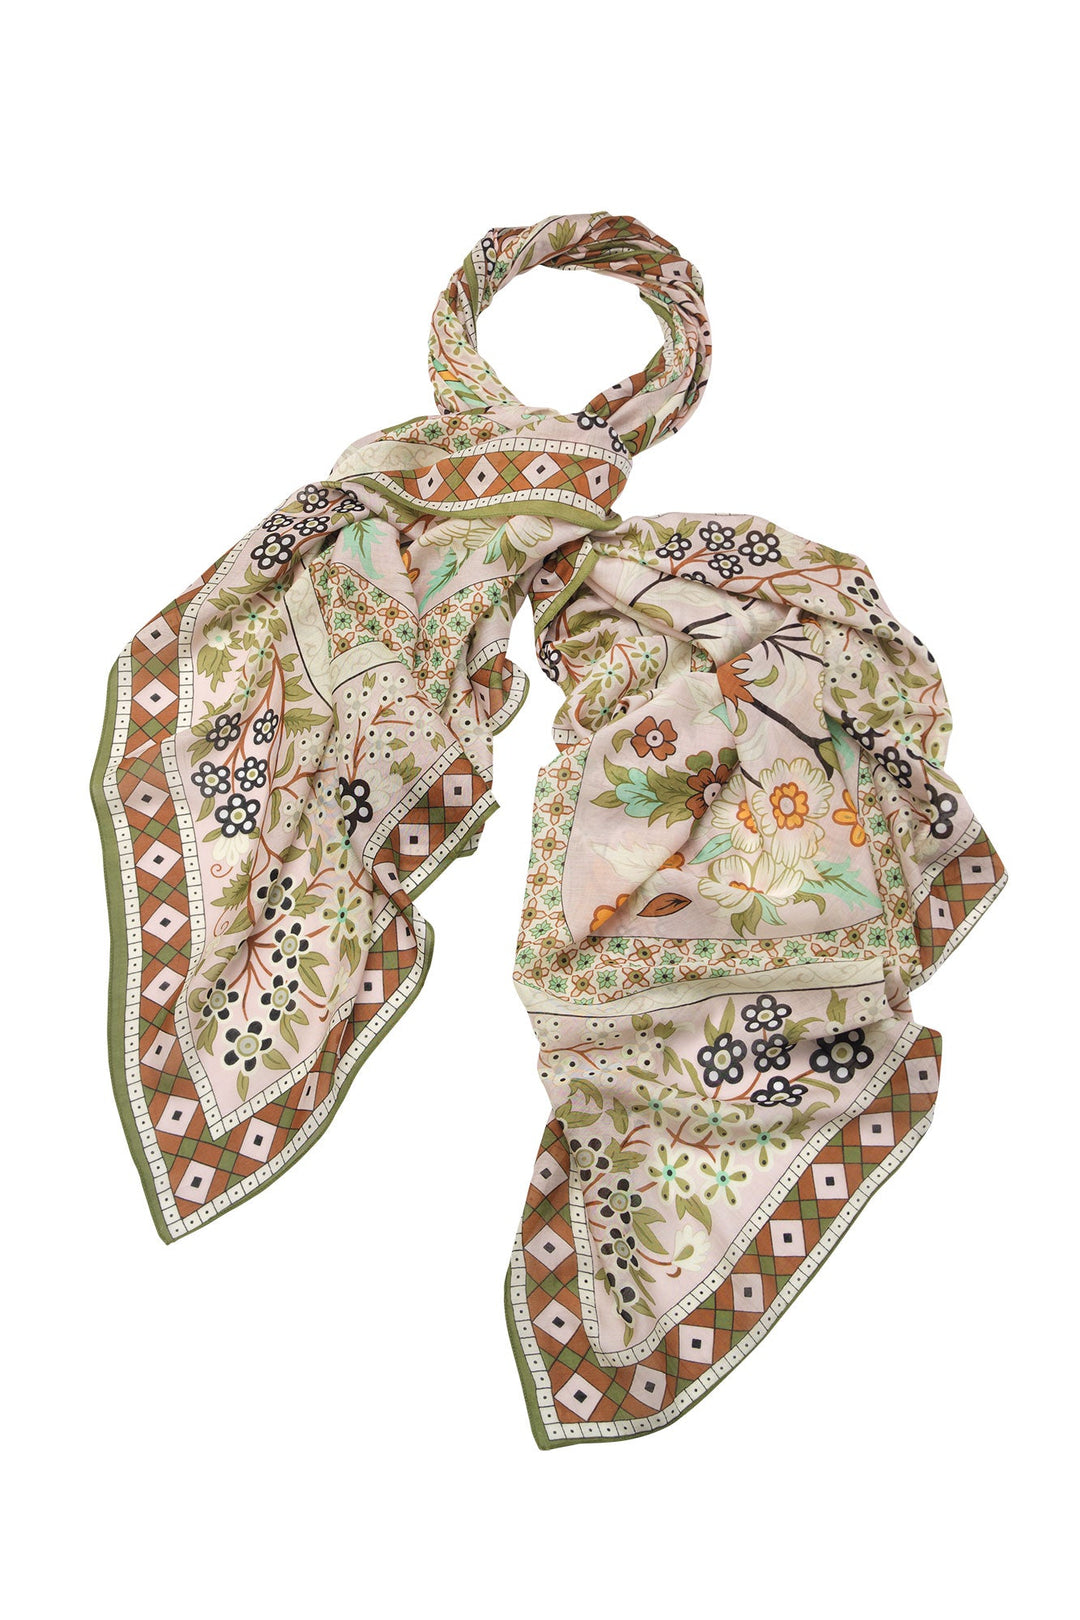 Women's accessories, gifts for her. Large scarf in floral flower arch sage print by One Hundred Stars